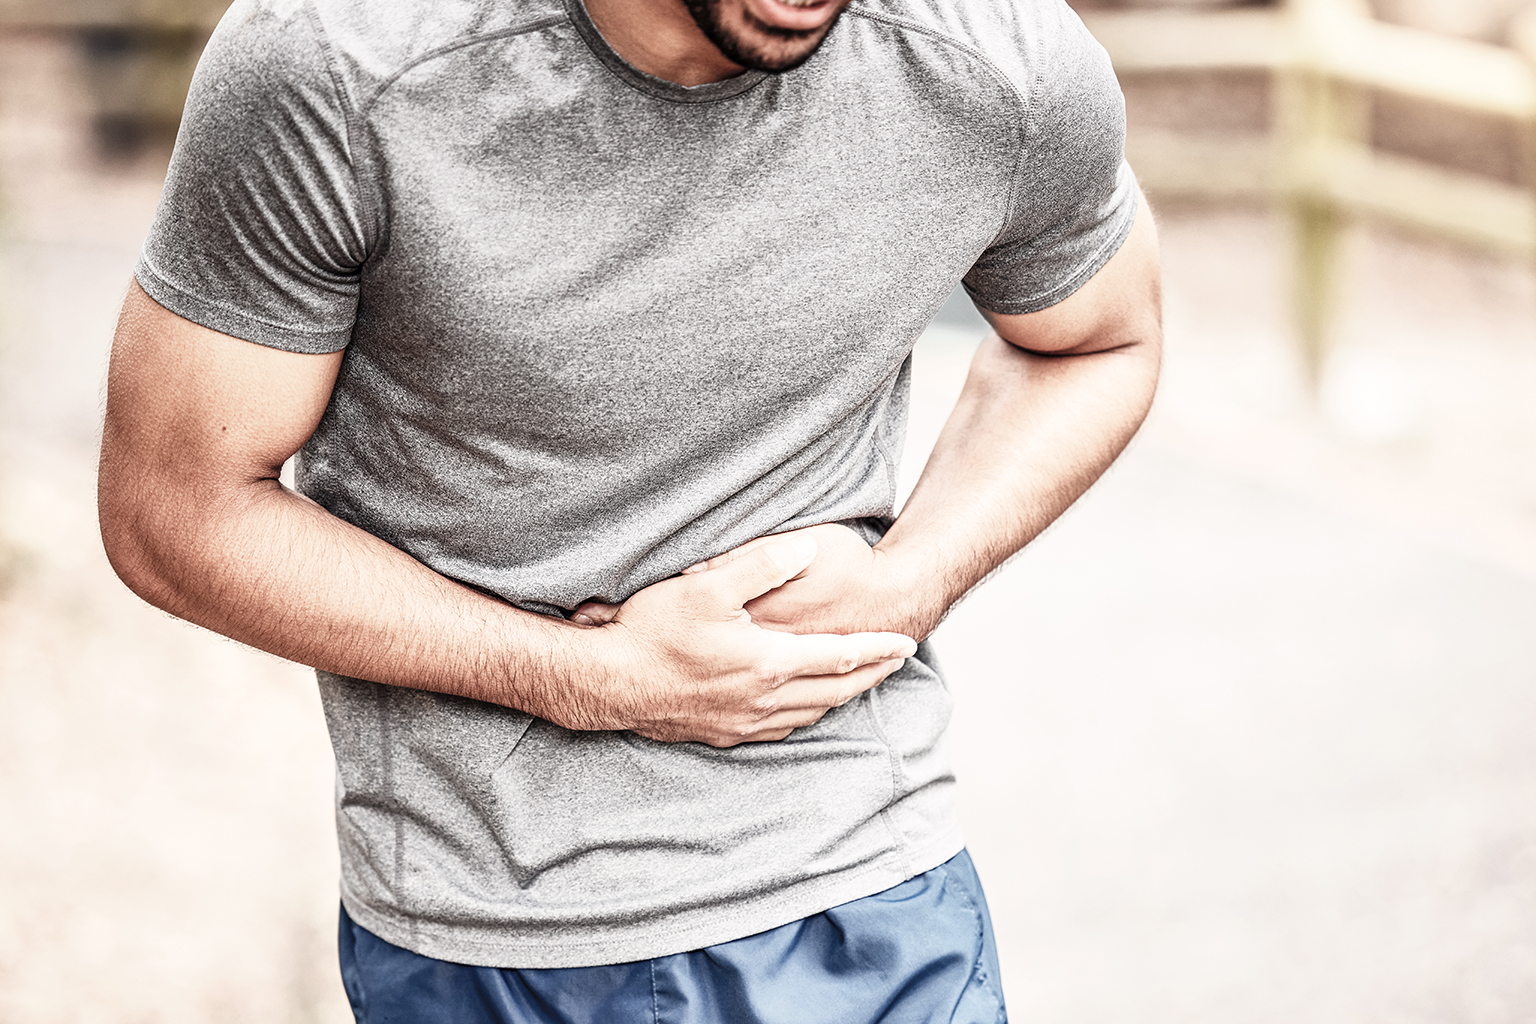 What Are The Types of Abdominal Hernias & How Do You Treat Them?